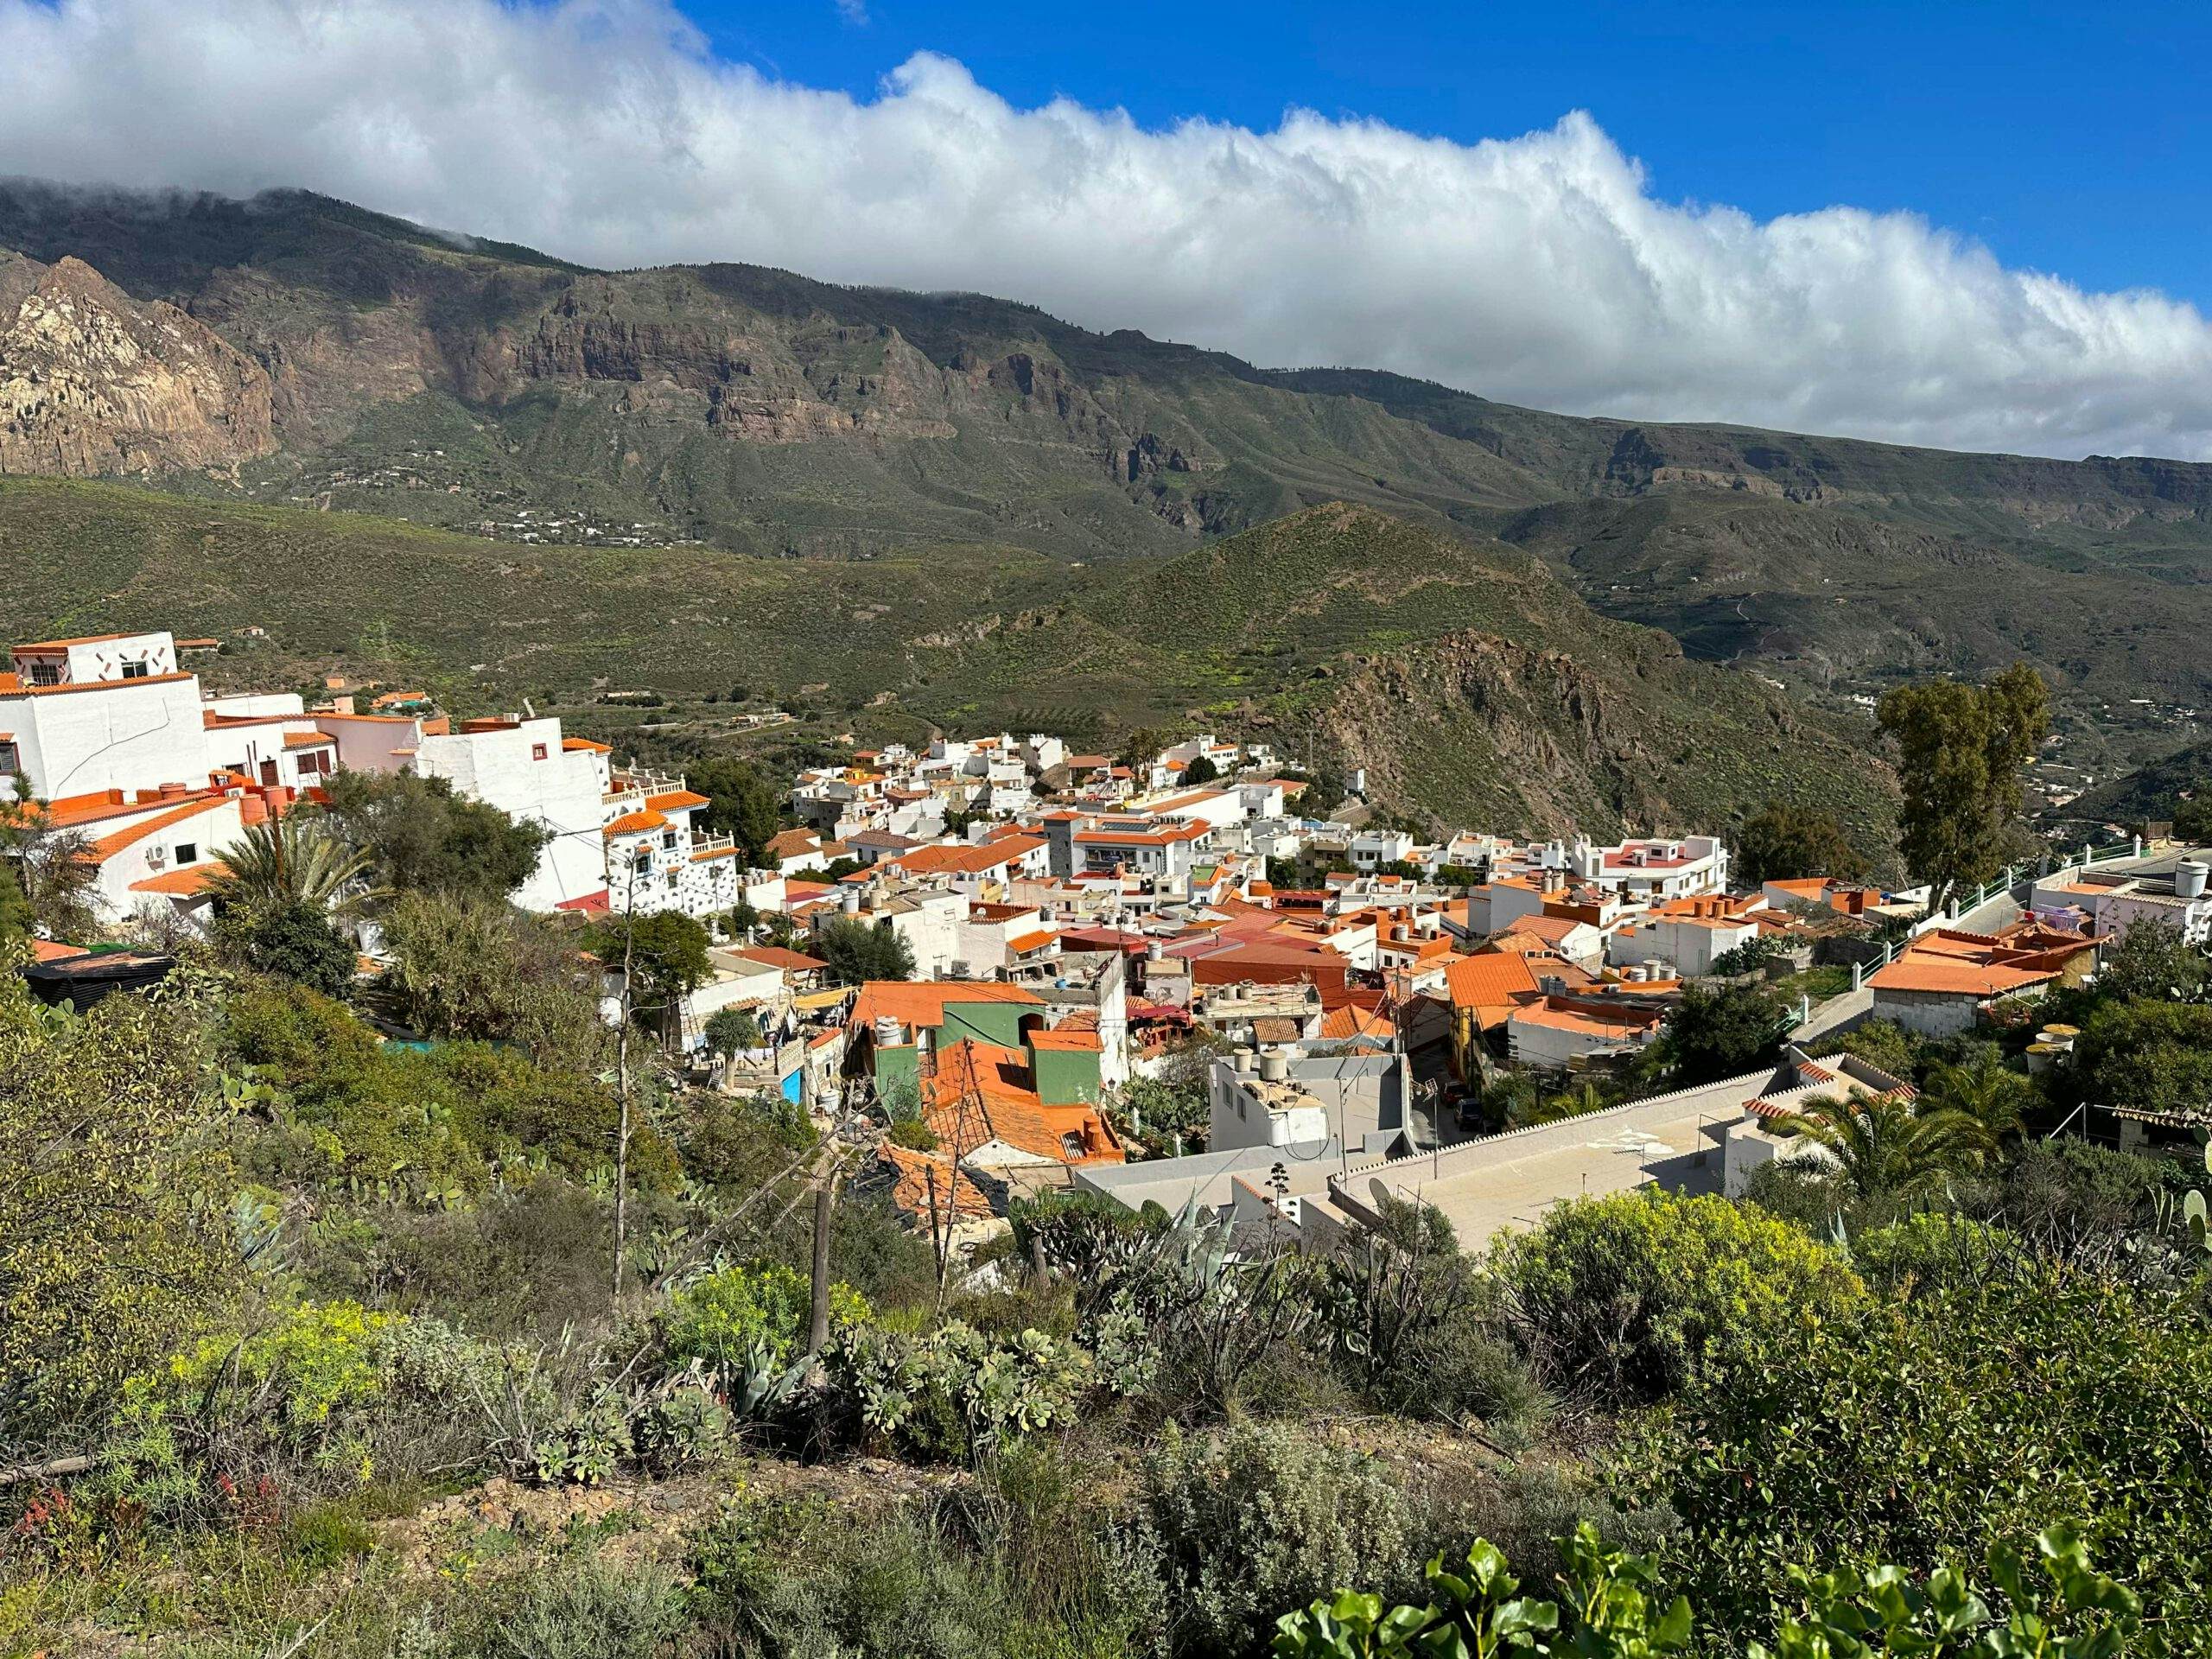 View of San Bartolomé from the hiking trail